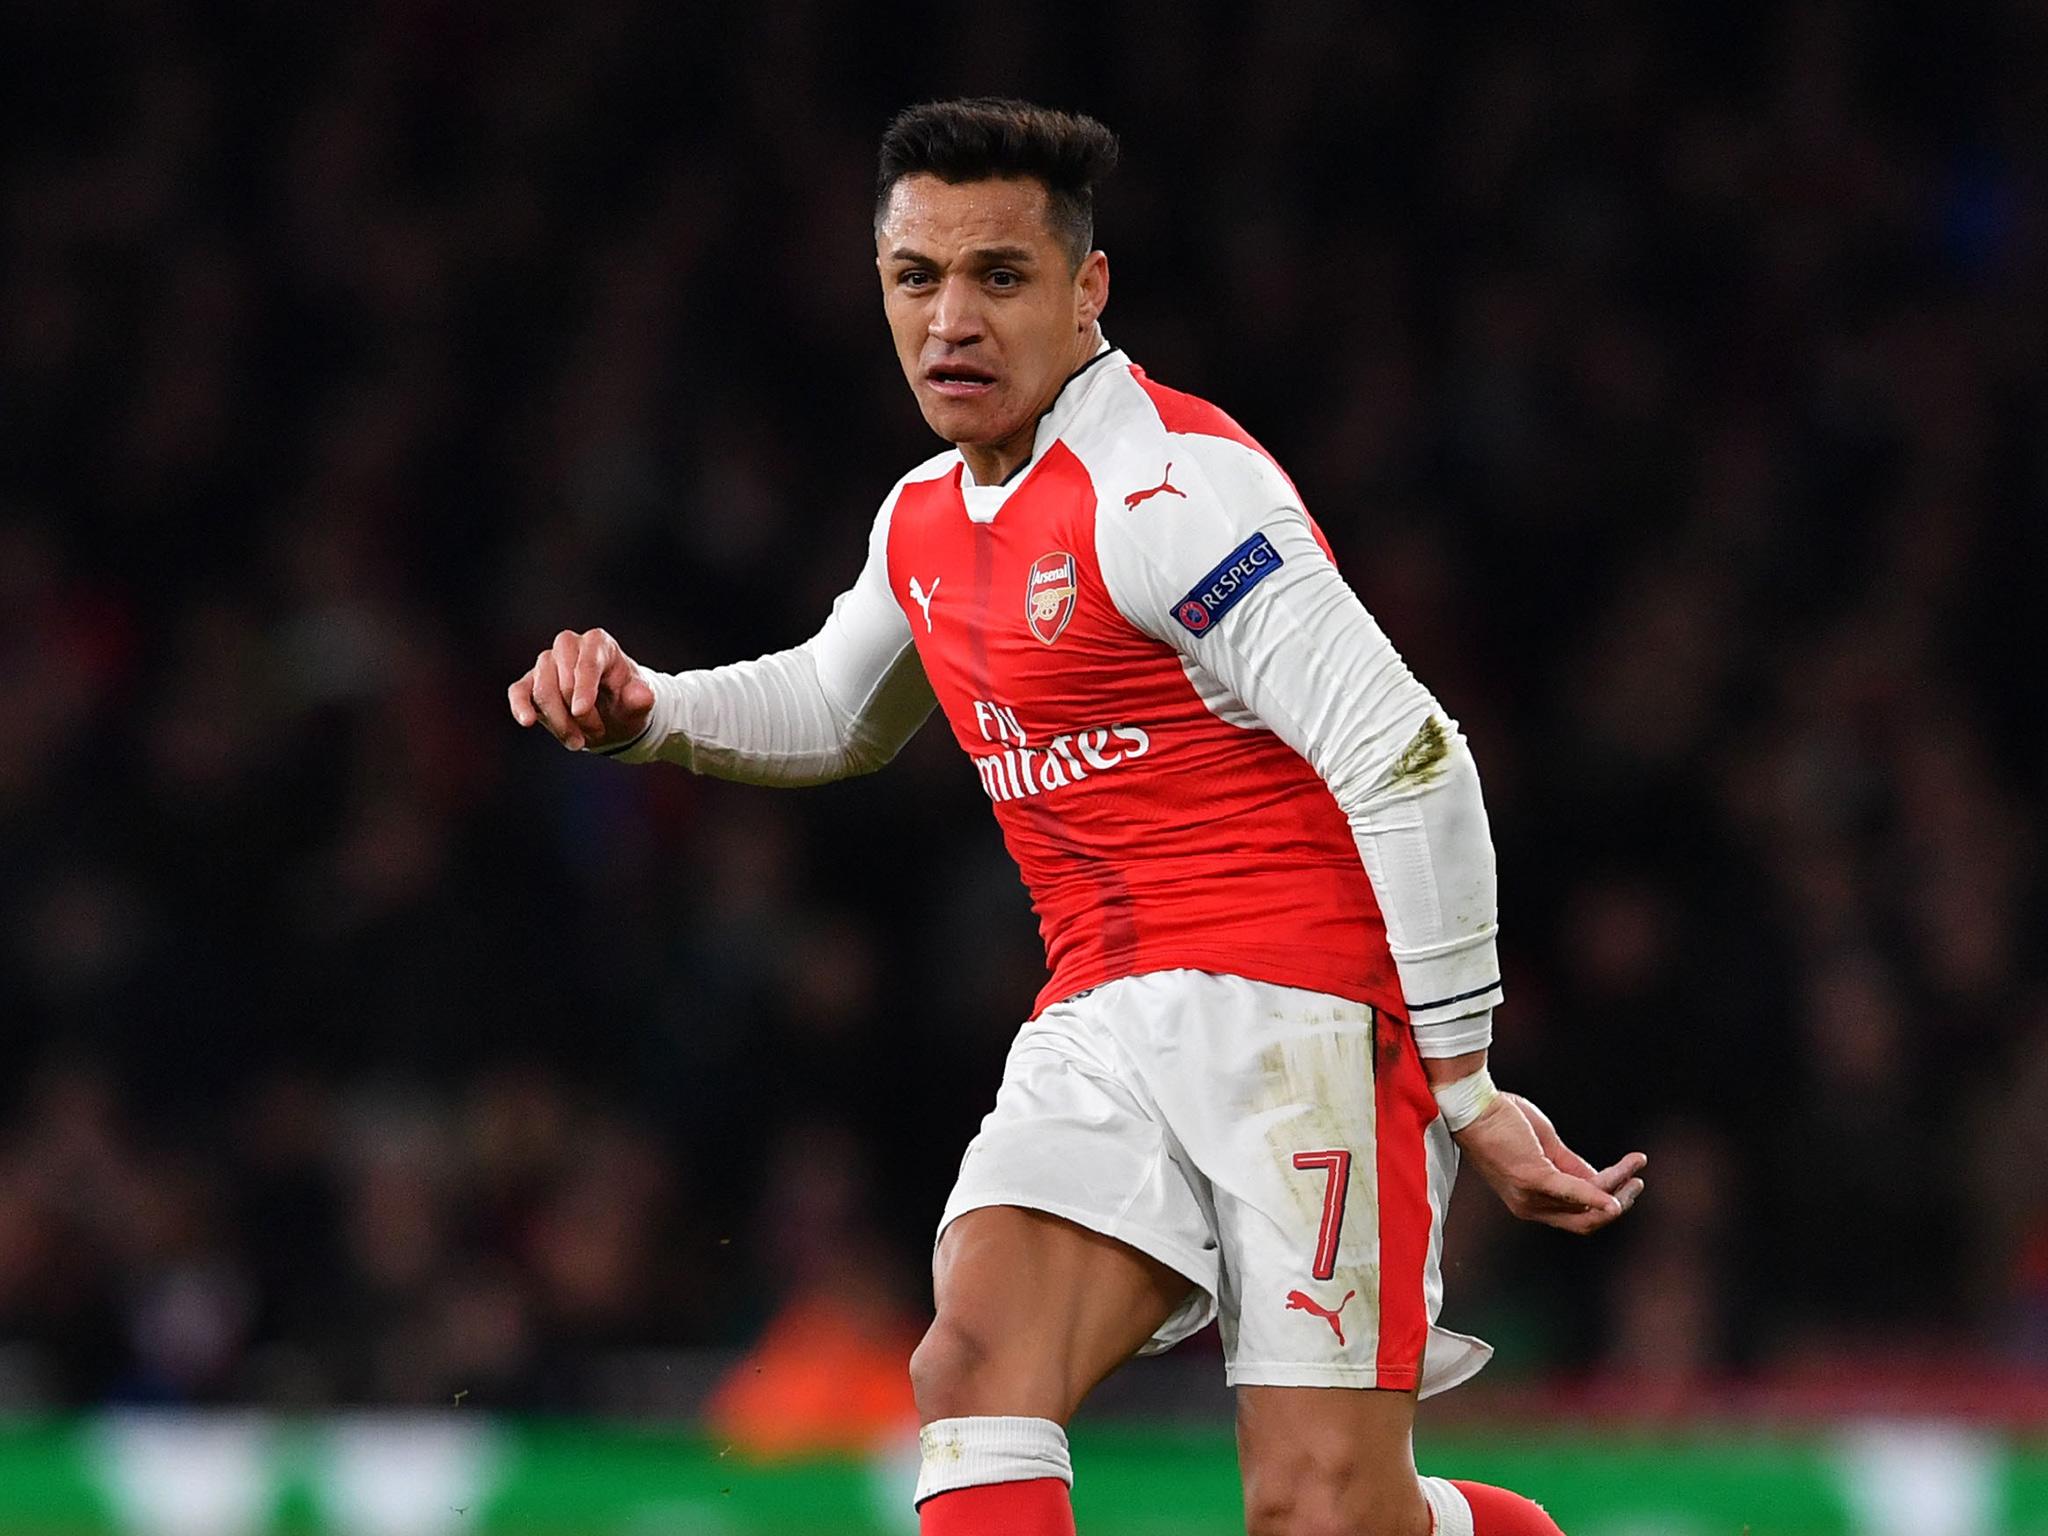 Arsenal will not allow Alexis Sanchez to join Chelsea